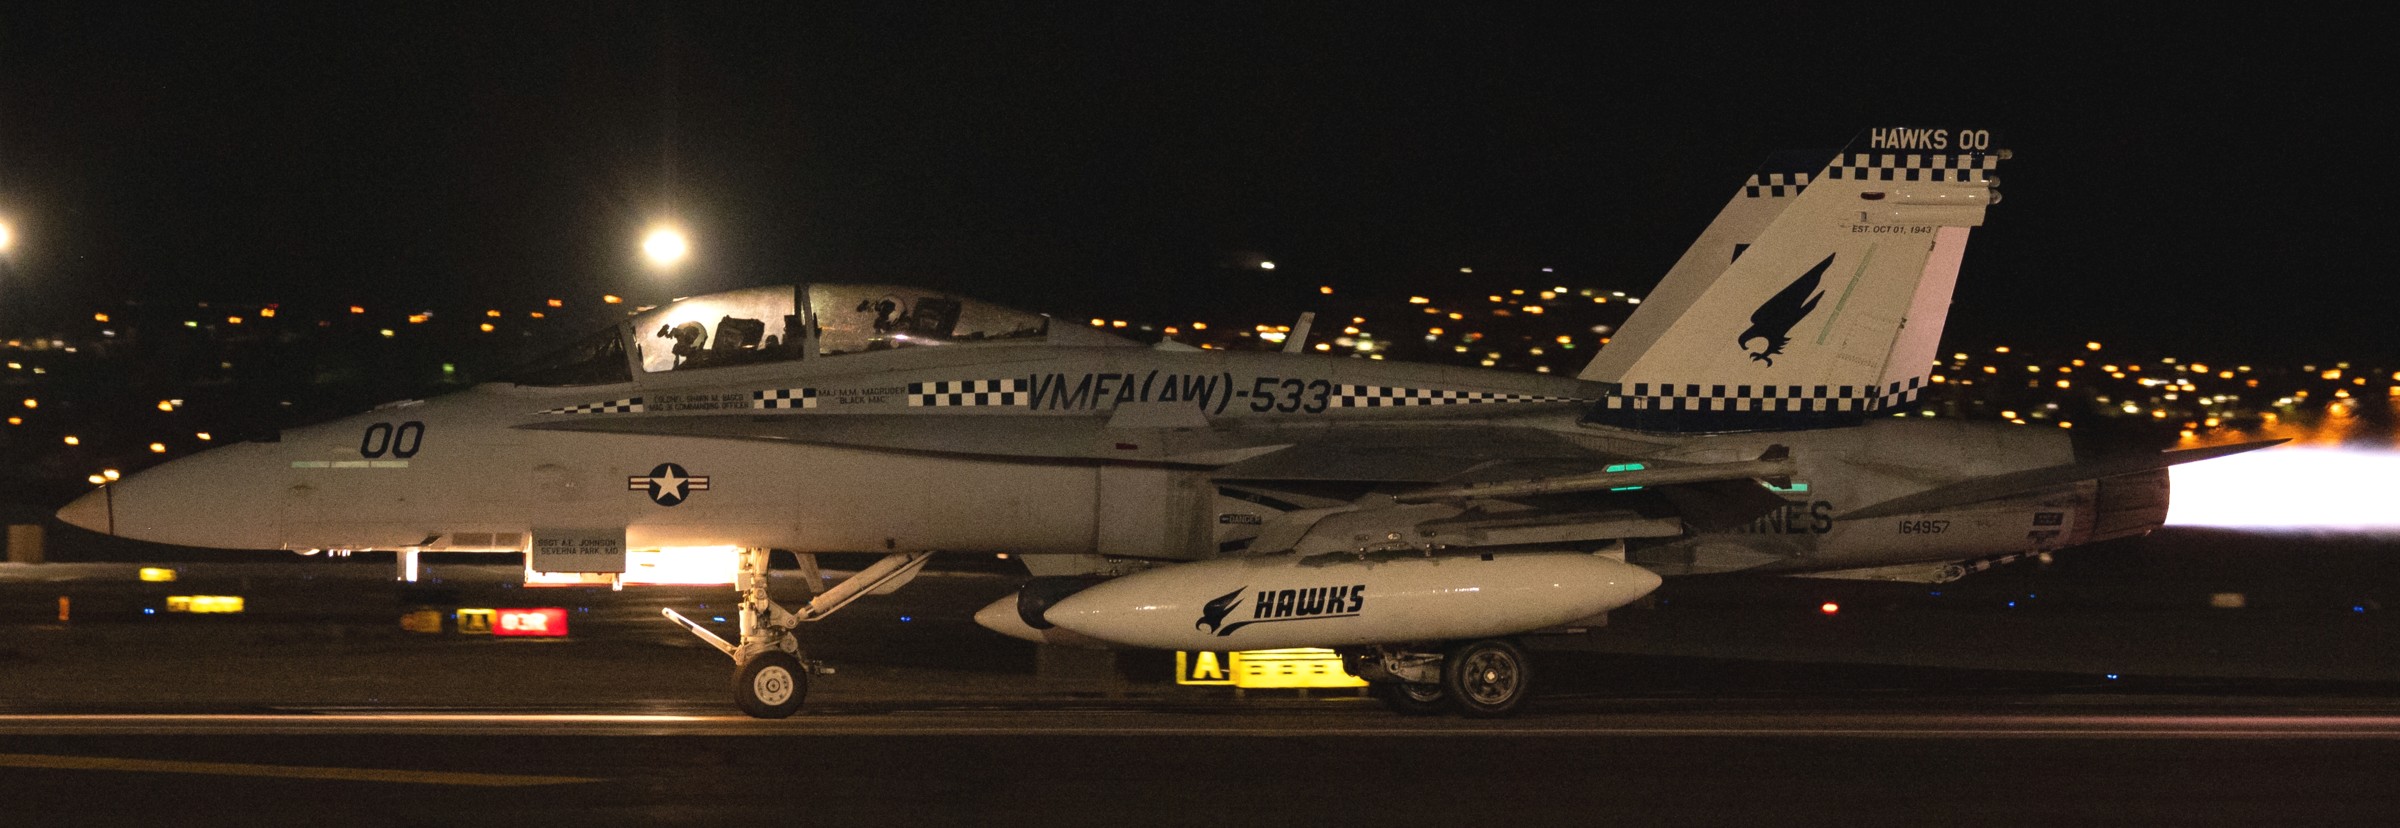 vmfa(aw)-533 hawks marine fighter attack squadron usmc f/a-18d hornet 90 exercise red flag nellis afb nevada